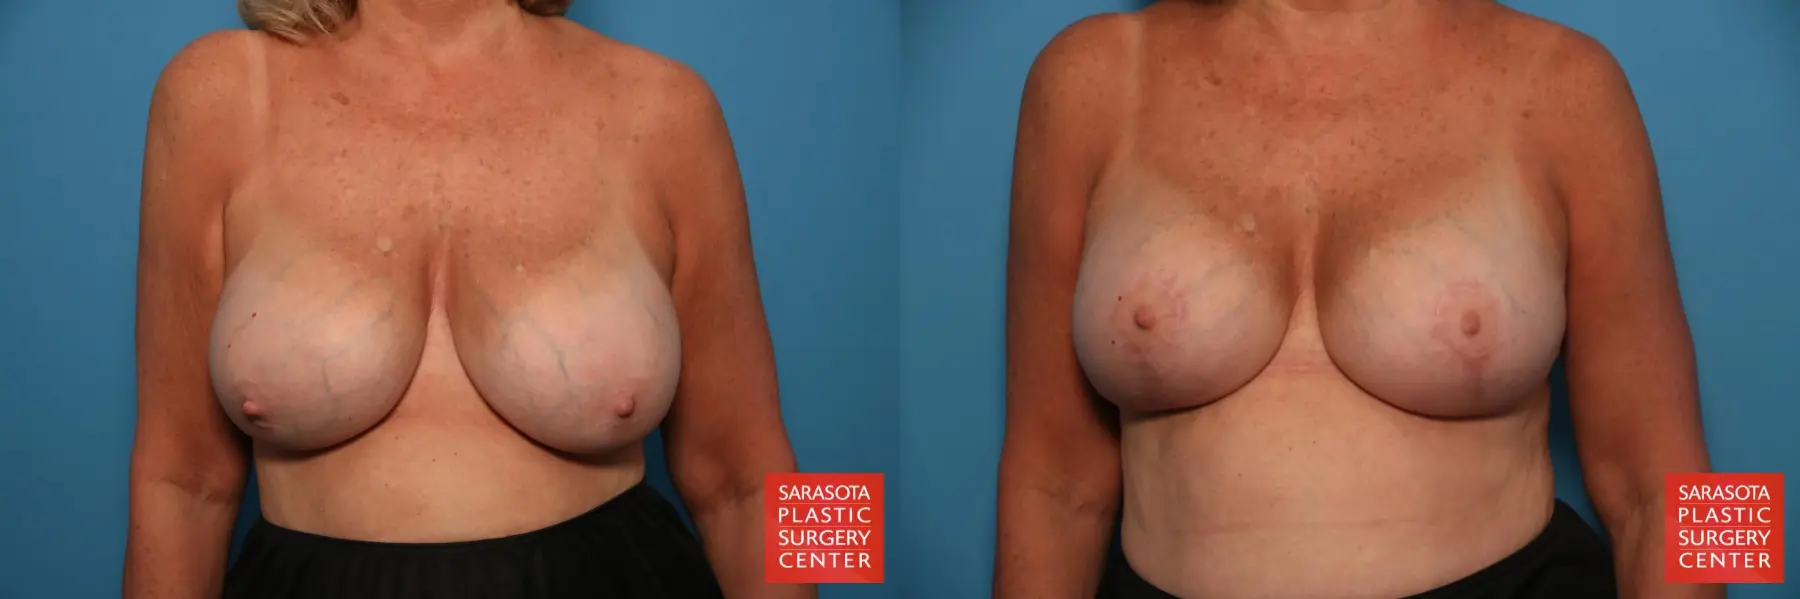 Breast Revision: Patient 2 - Before and After 1